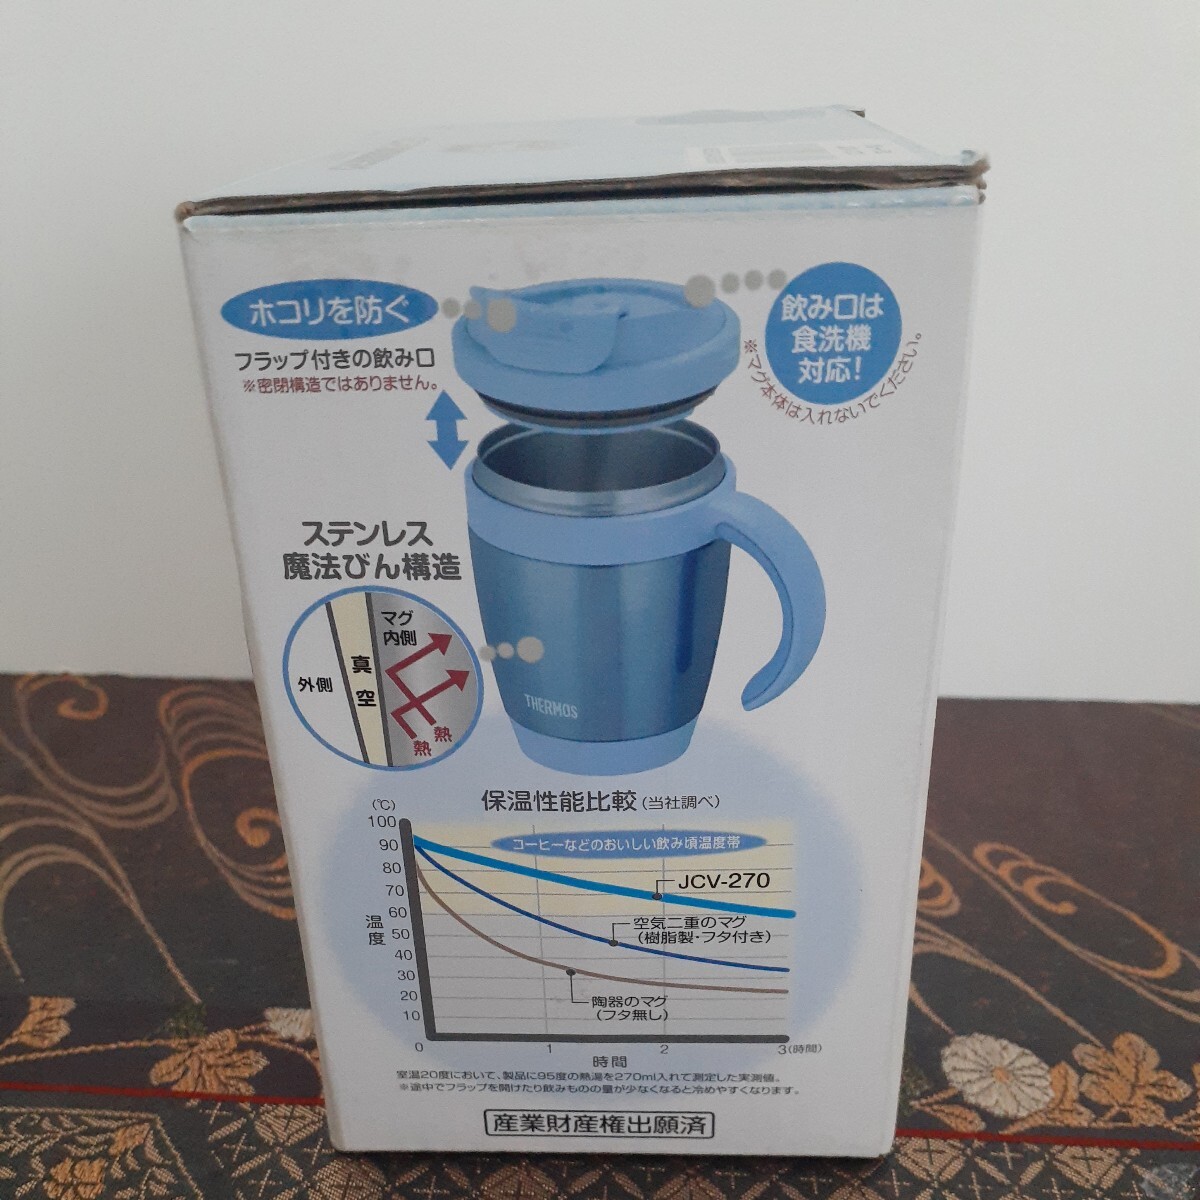  Thermos vacuum insulation mug THERMOS stainless steel magic bin structure 270ml